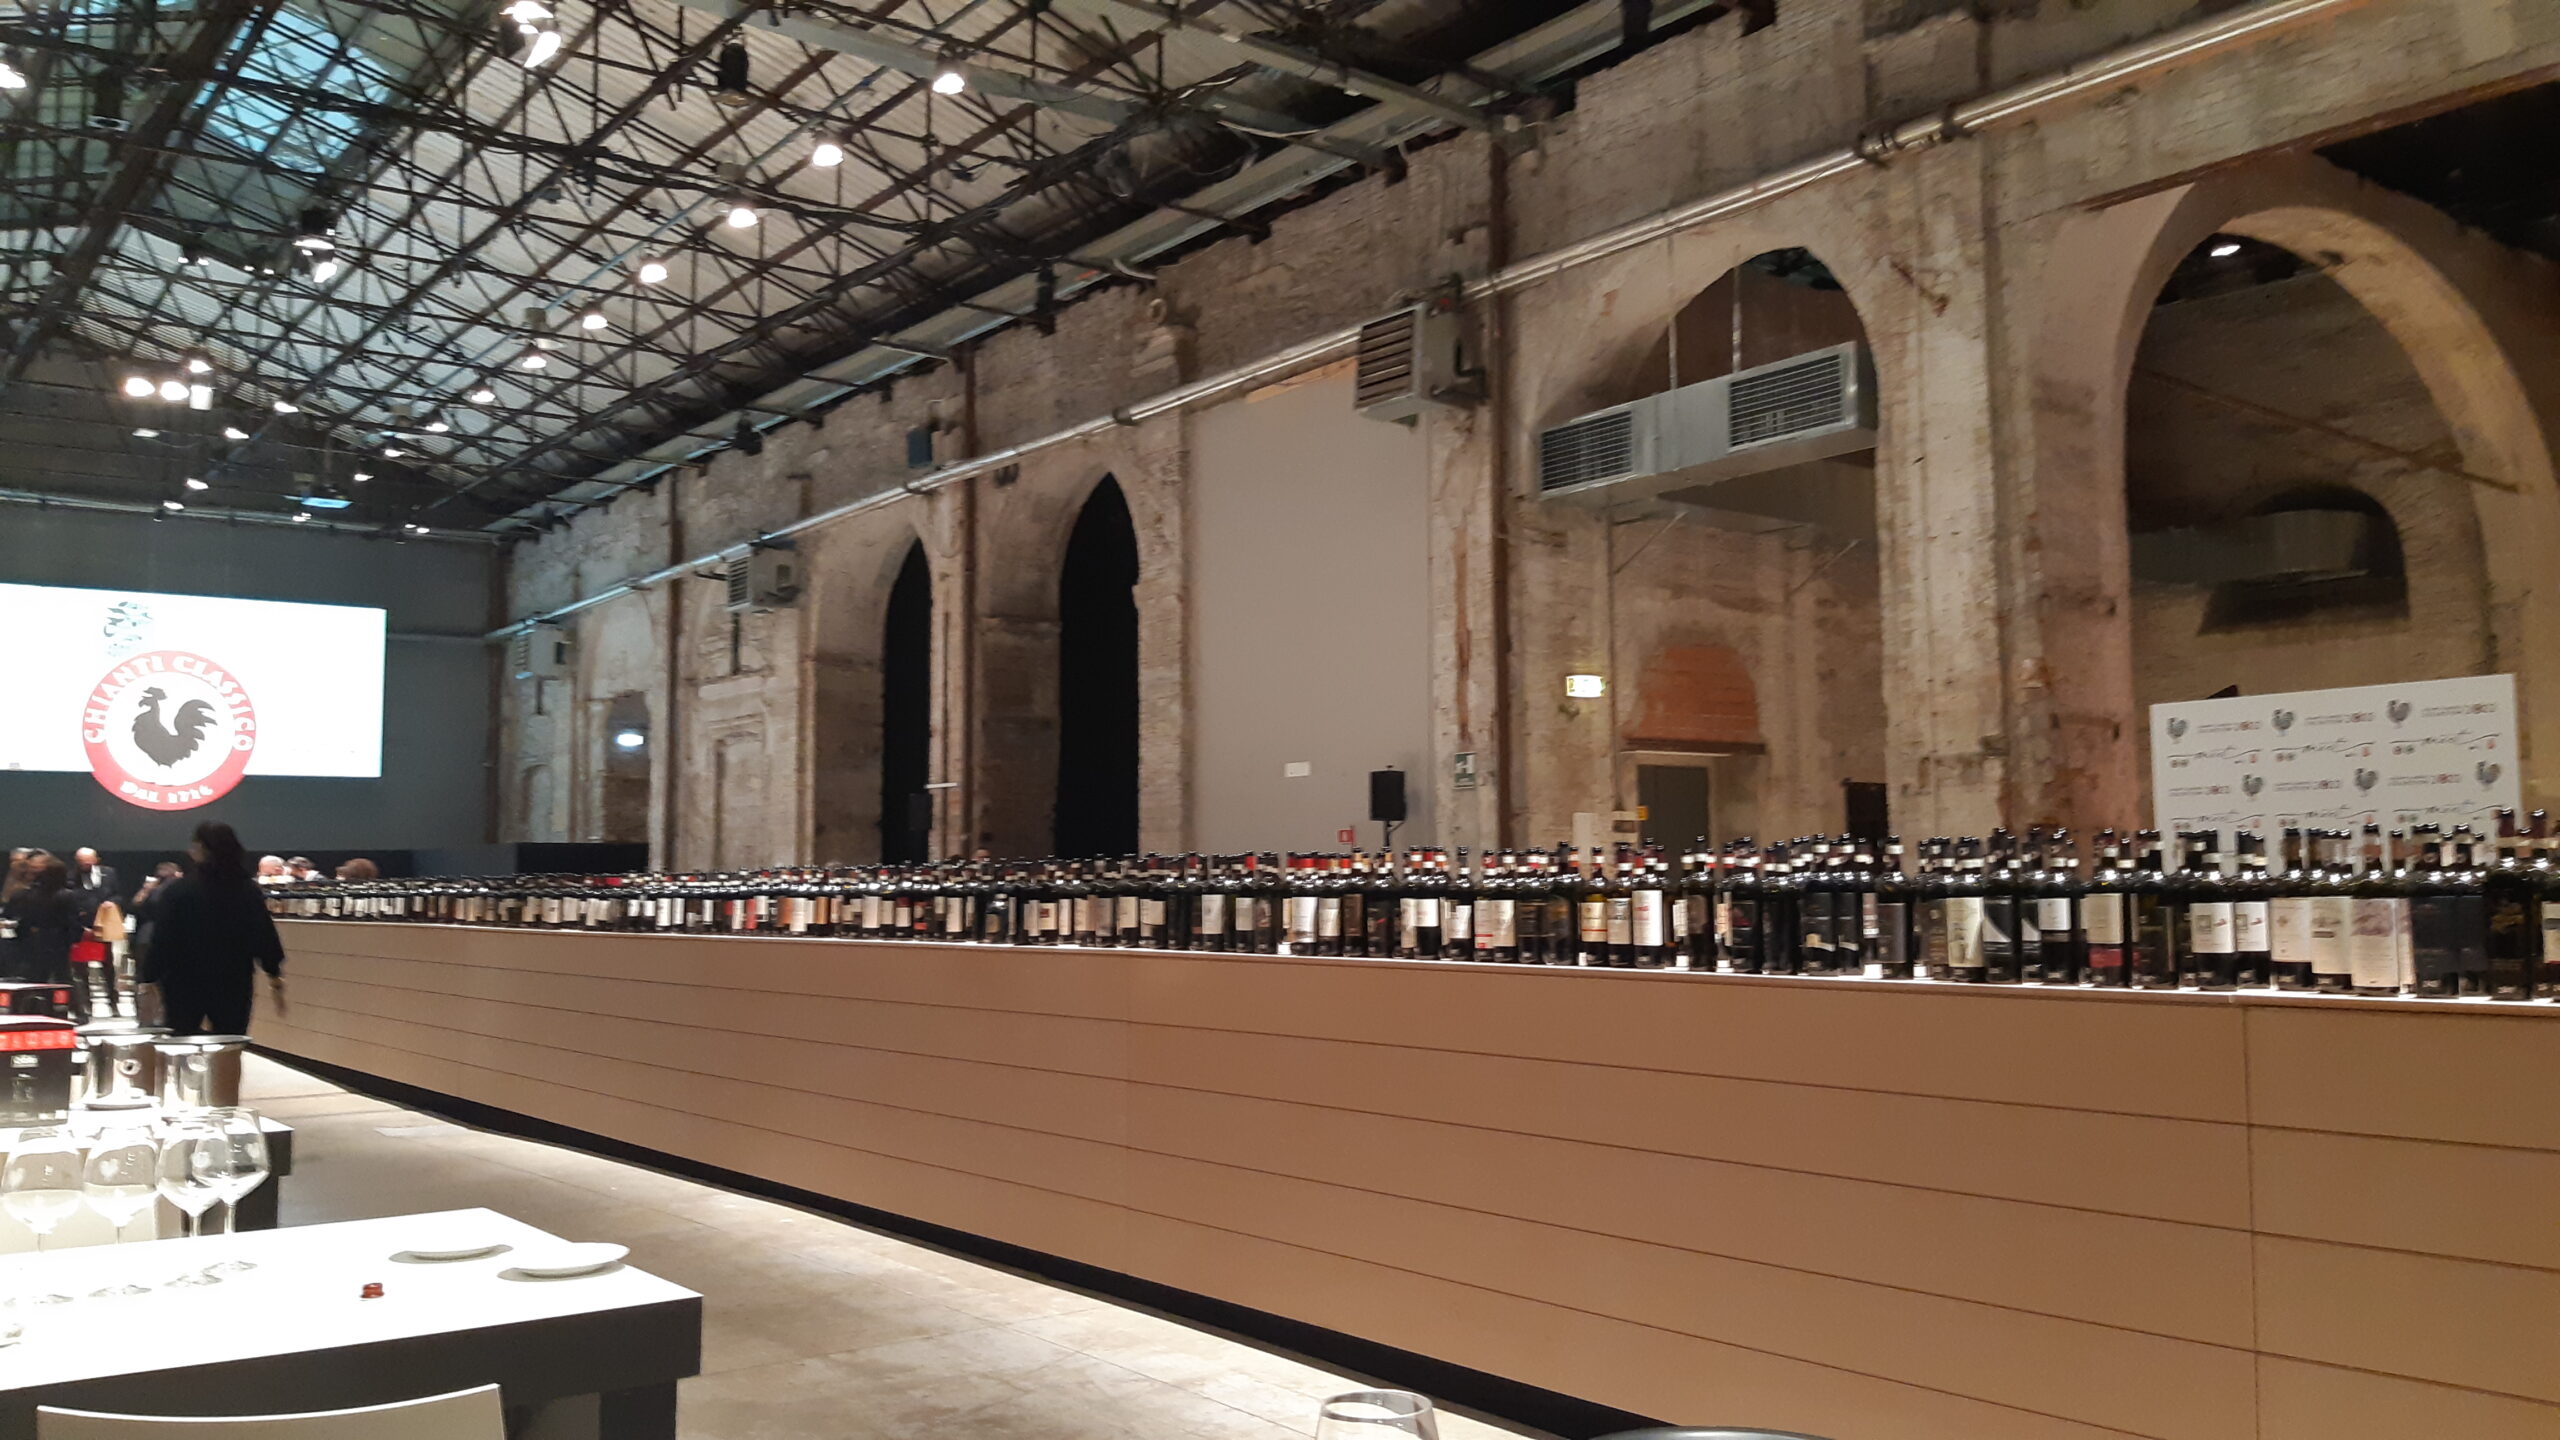 Chianti Classico Collection 2024, an event not to be missed, photos By Carol Agostini